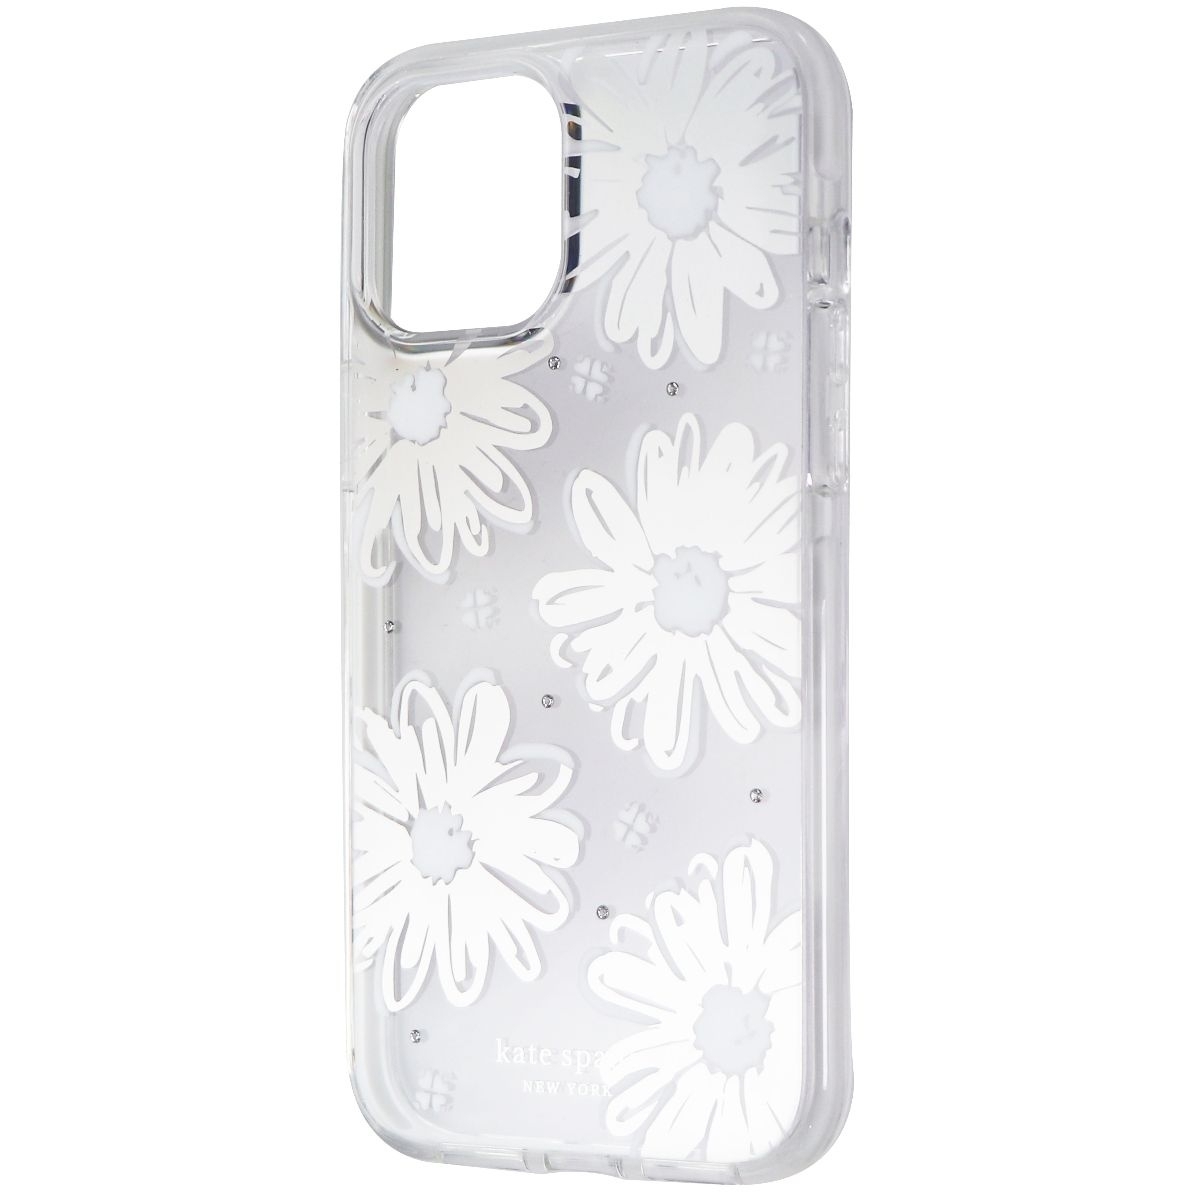 Kate Spade Defensive Hardshell Case For IPhone 12 Pro Max - Daisy Iridescent